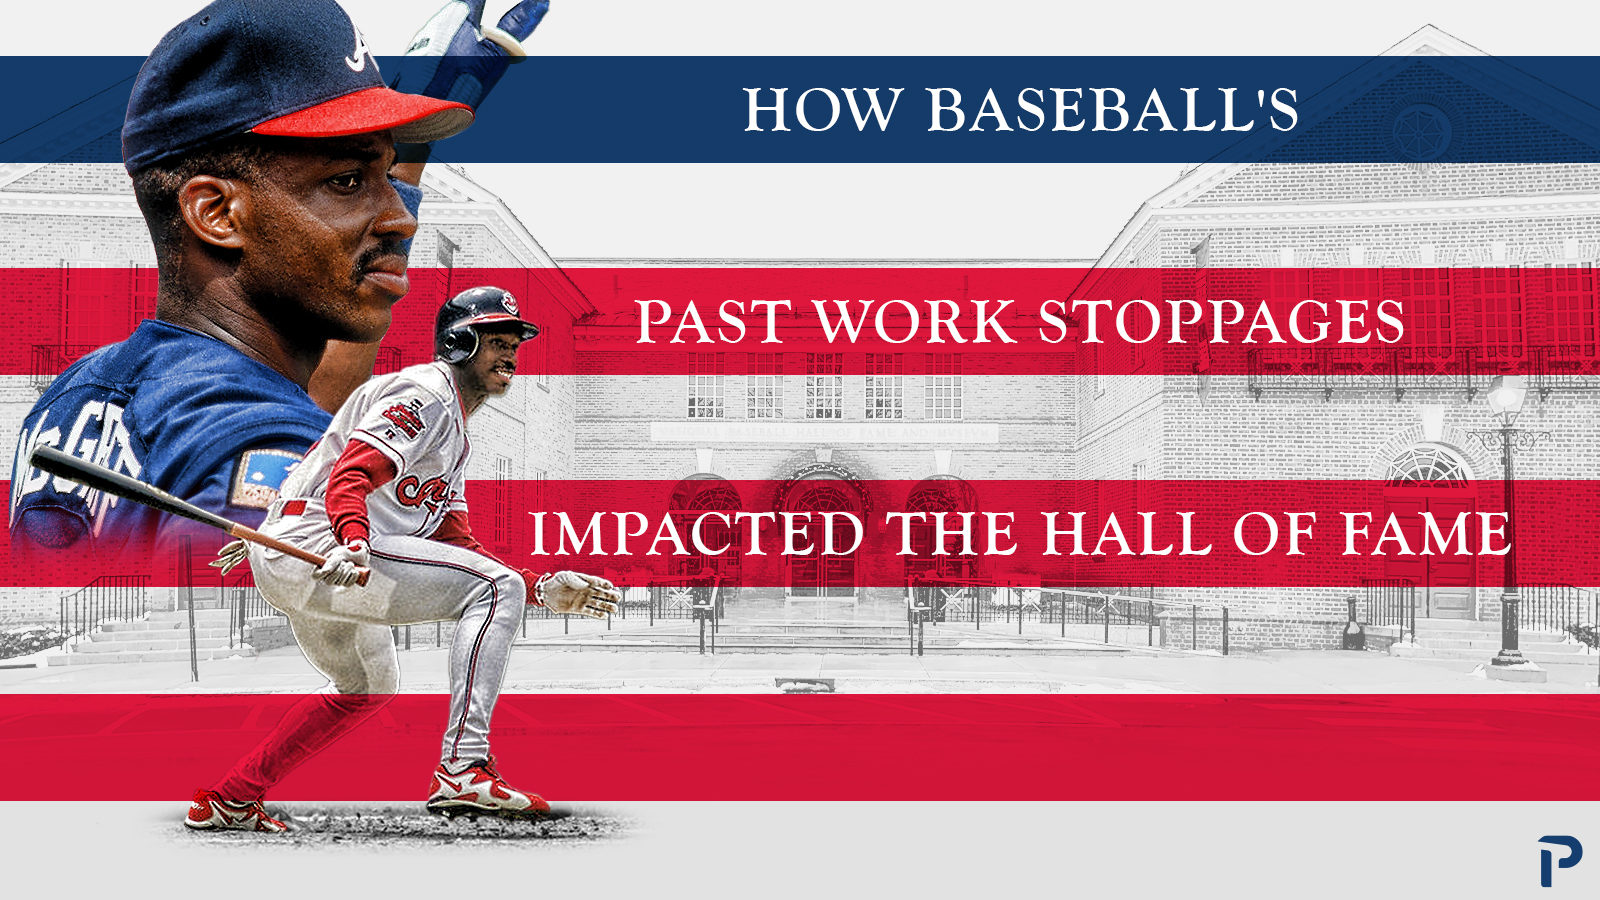 How Baseball's Past Work Stoppages Impacted the Hall of Fame